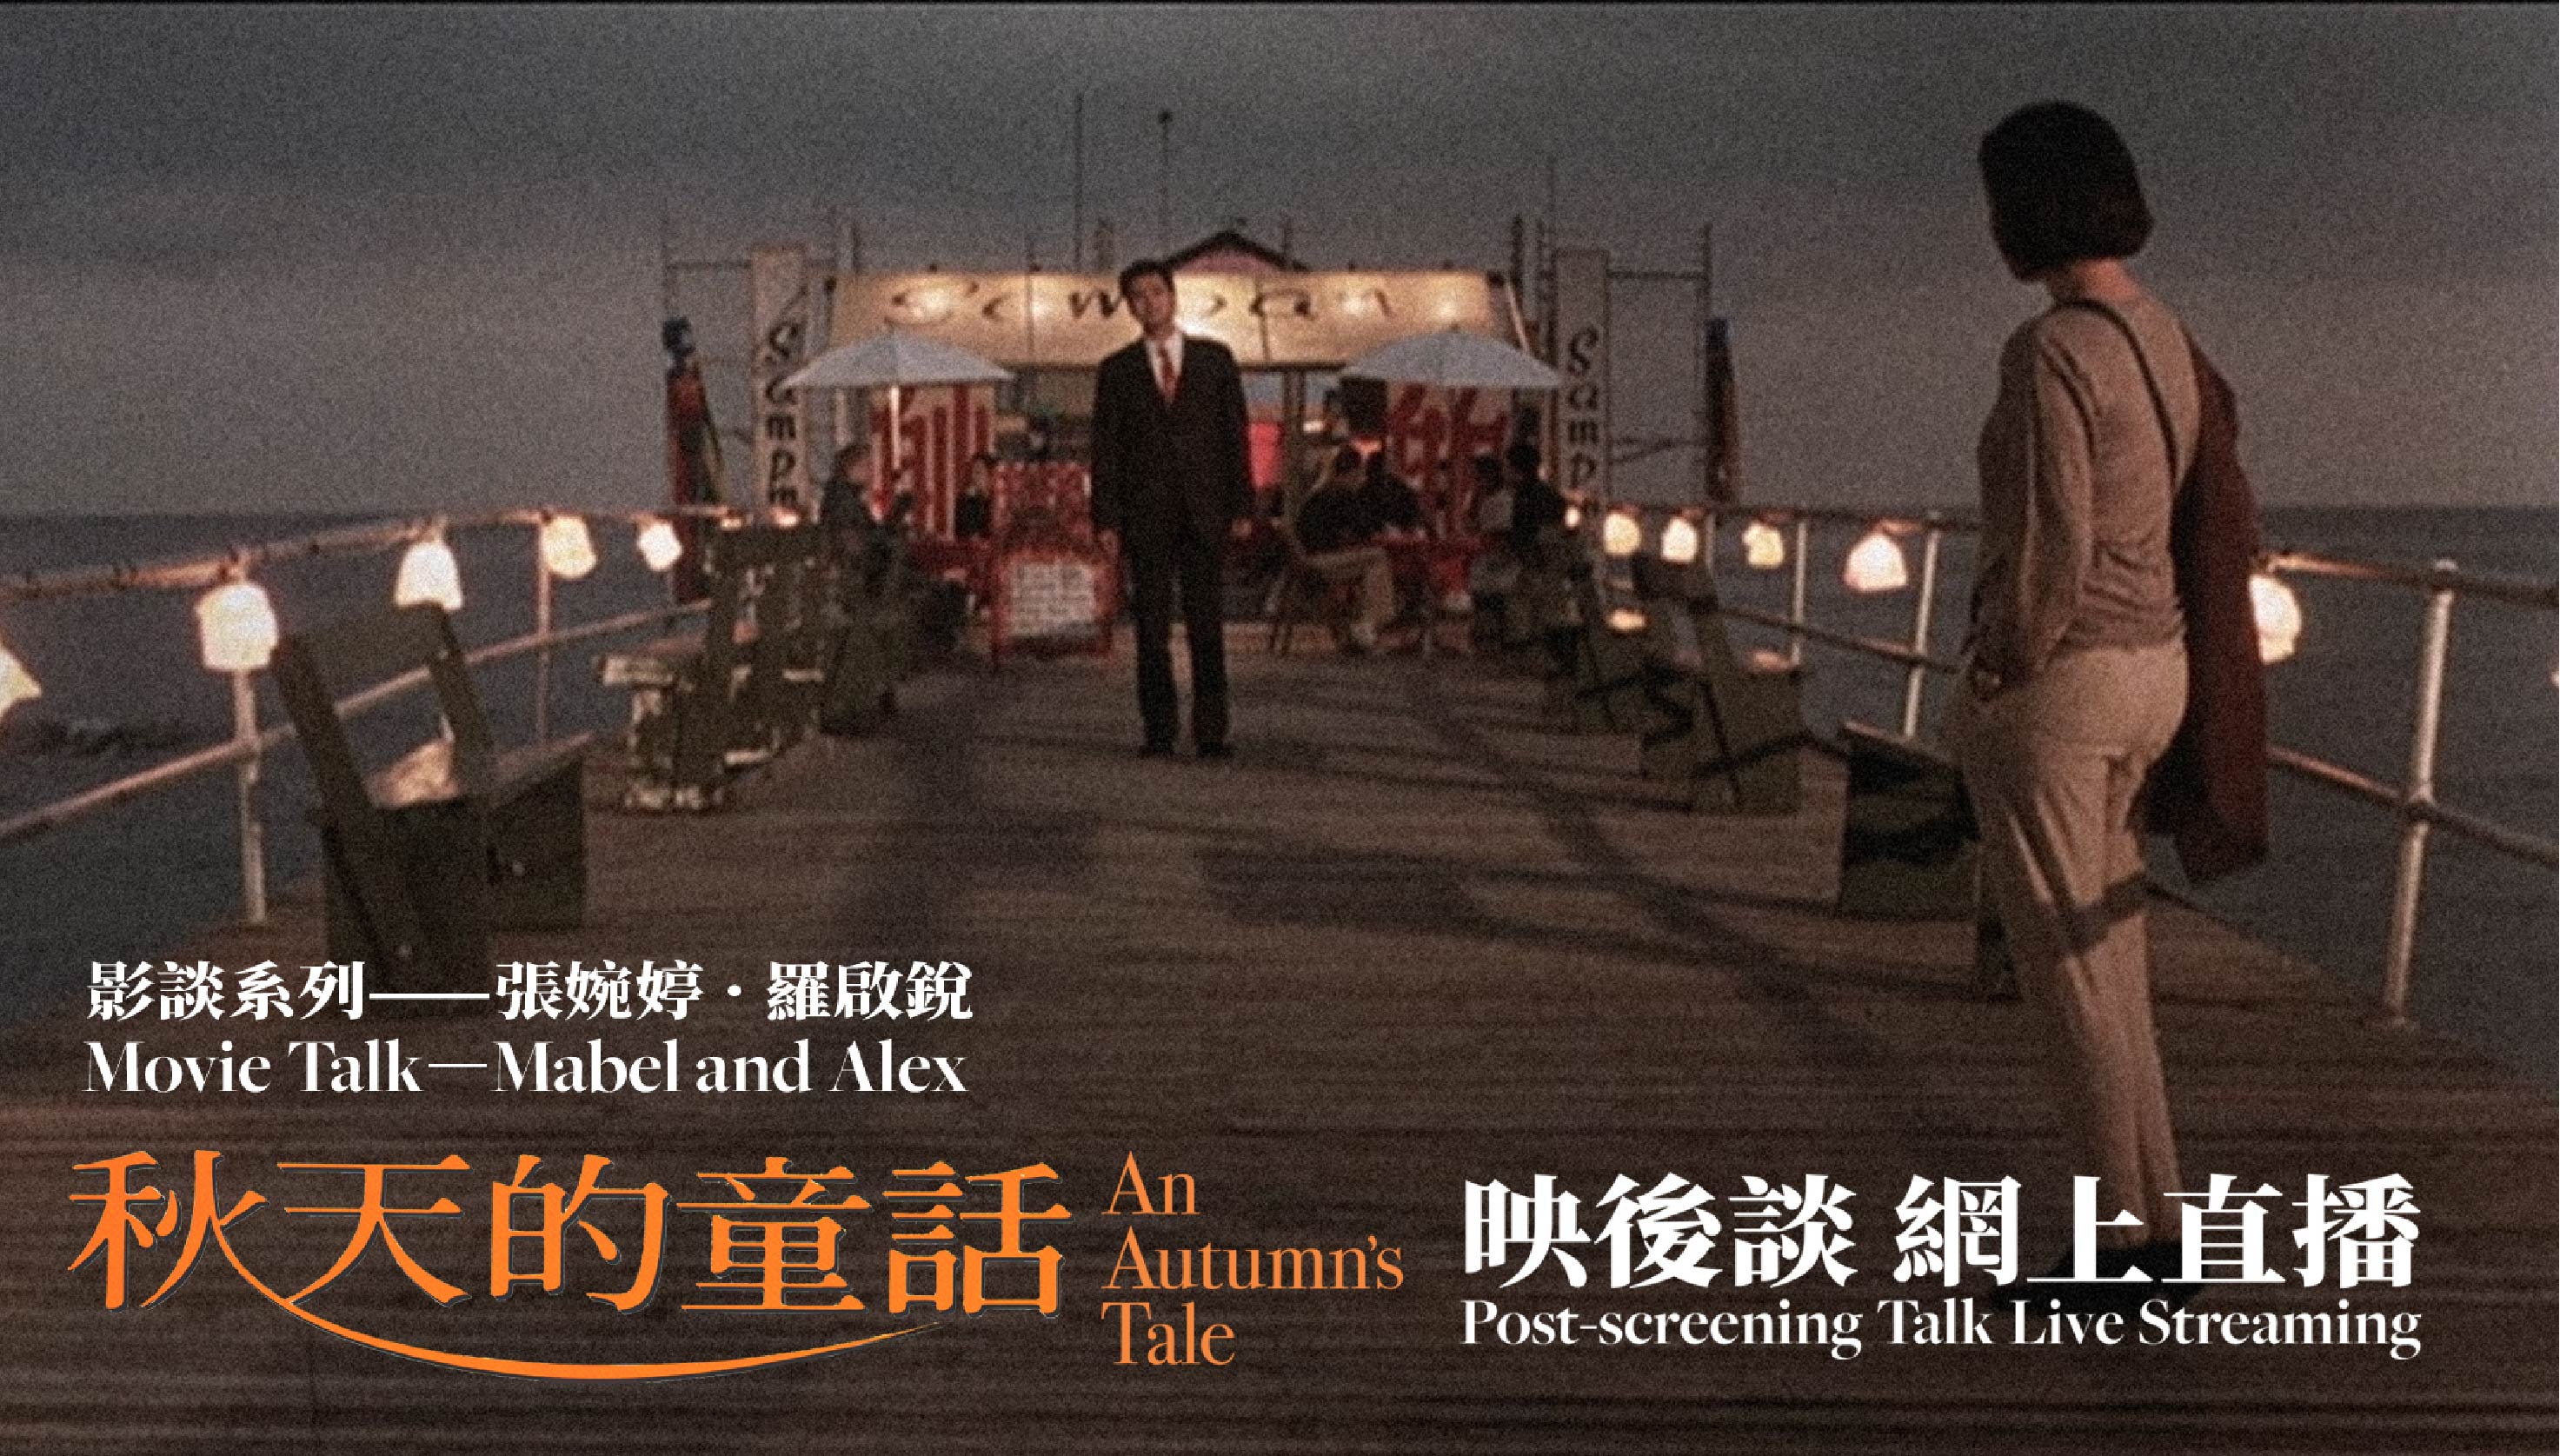 Movie Talk—Mabel and Alex<br>An Autumn's Tale Post-screening Talk<br>Live Streaming